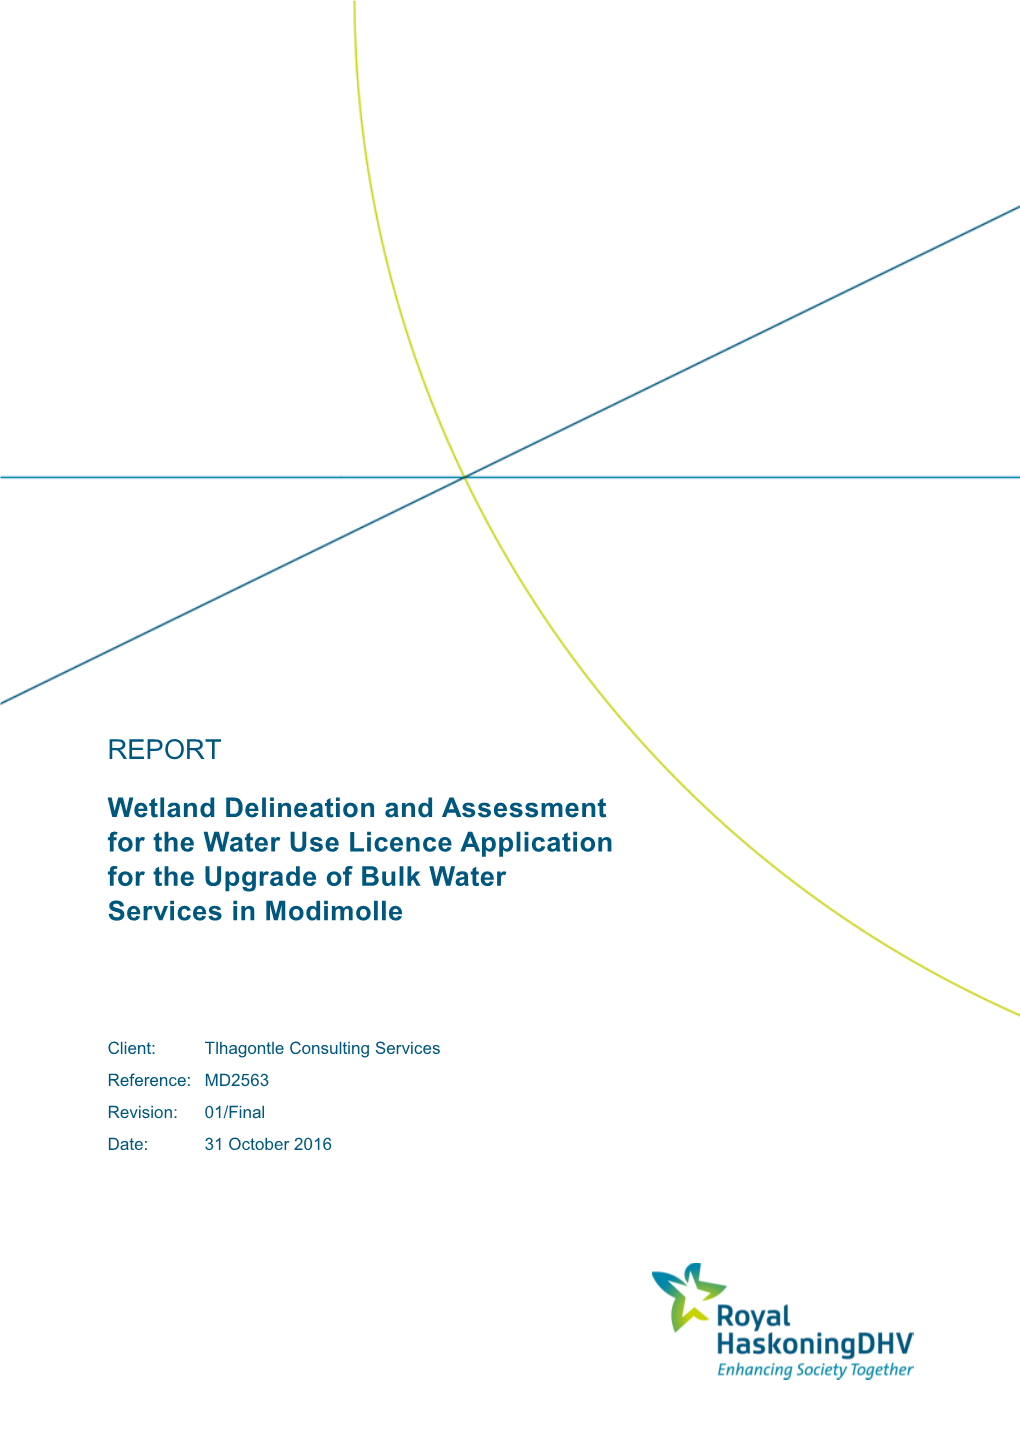 Wetland Delineation and Assessment for the Water Use Licence Application for the Upgrade of Bulk Water Services in Modimolle